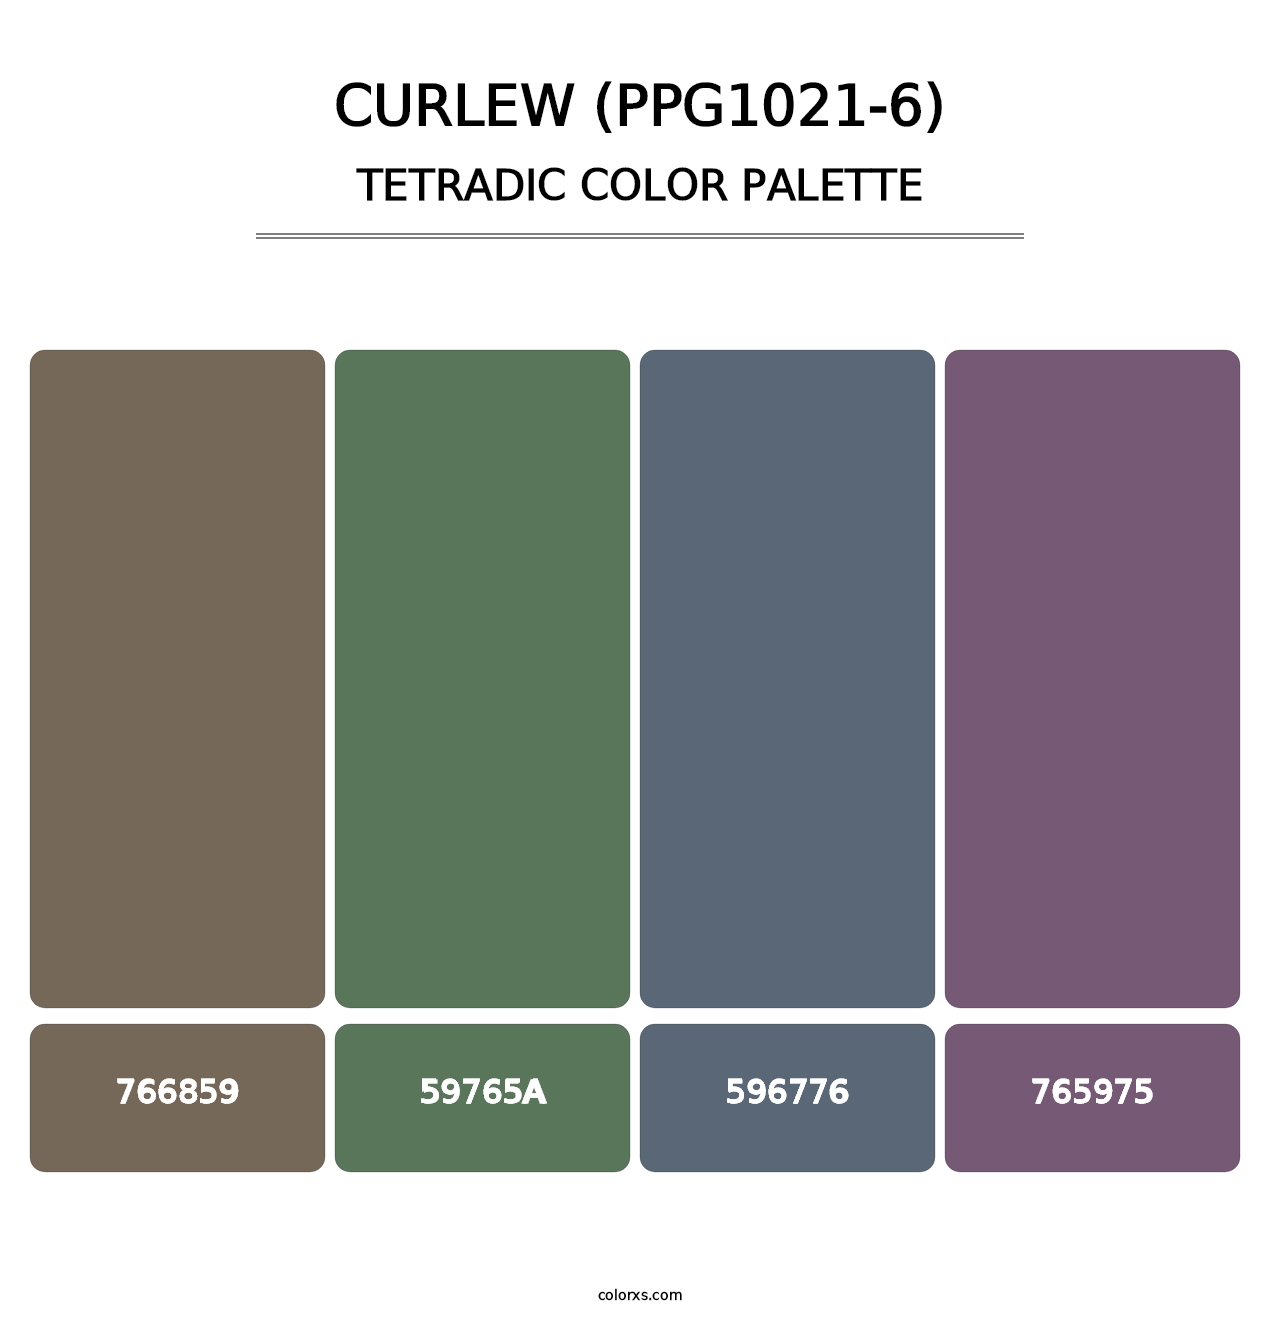 Curlew (PPG1021-6) - Tetradic Color Palette